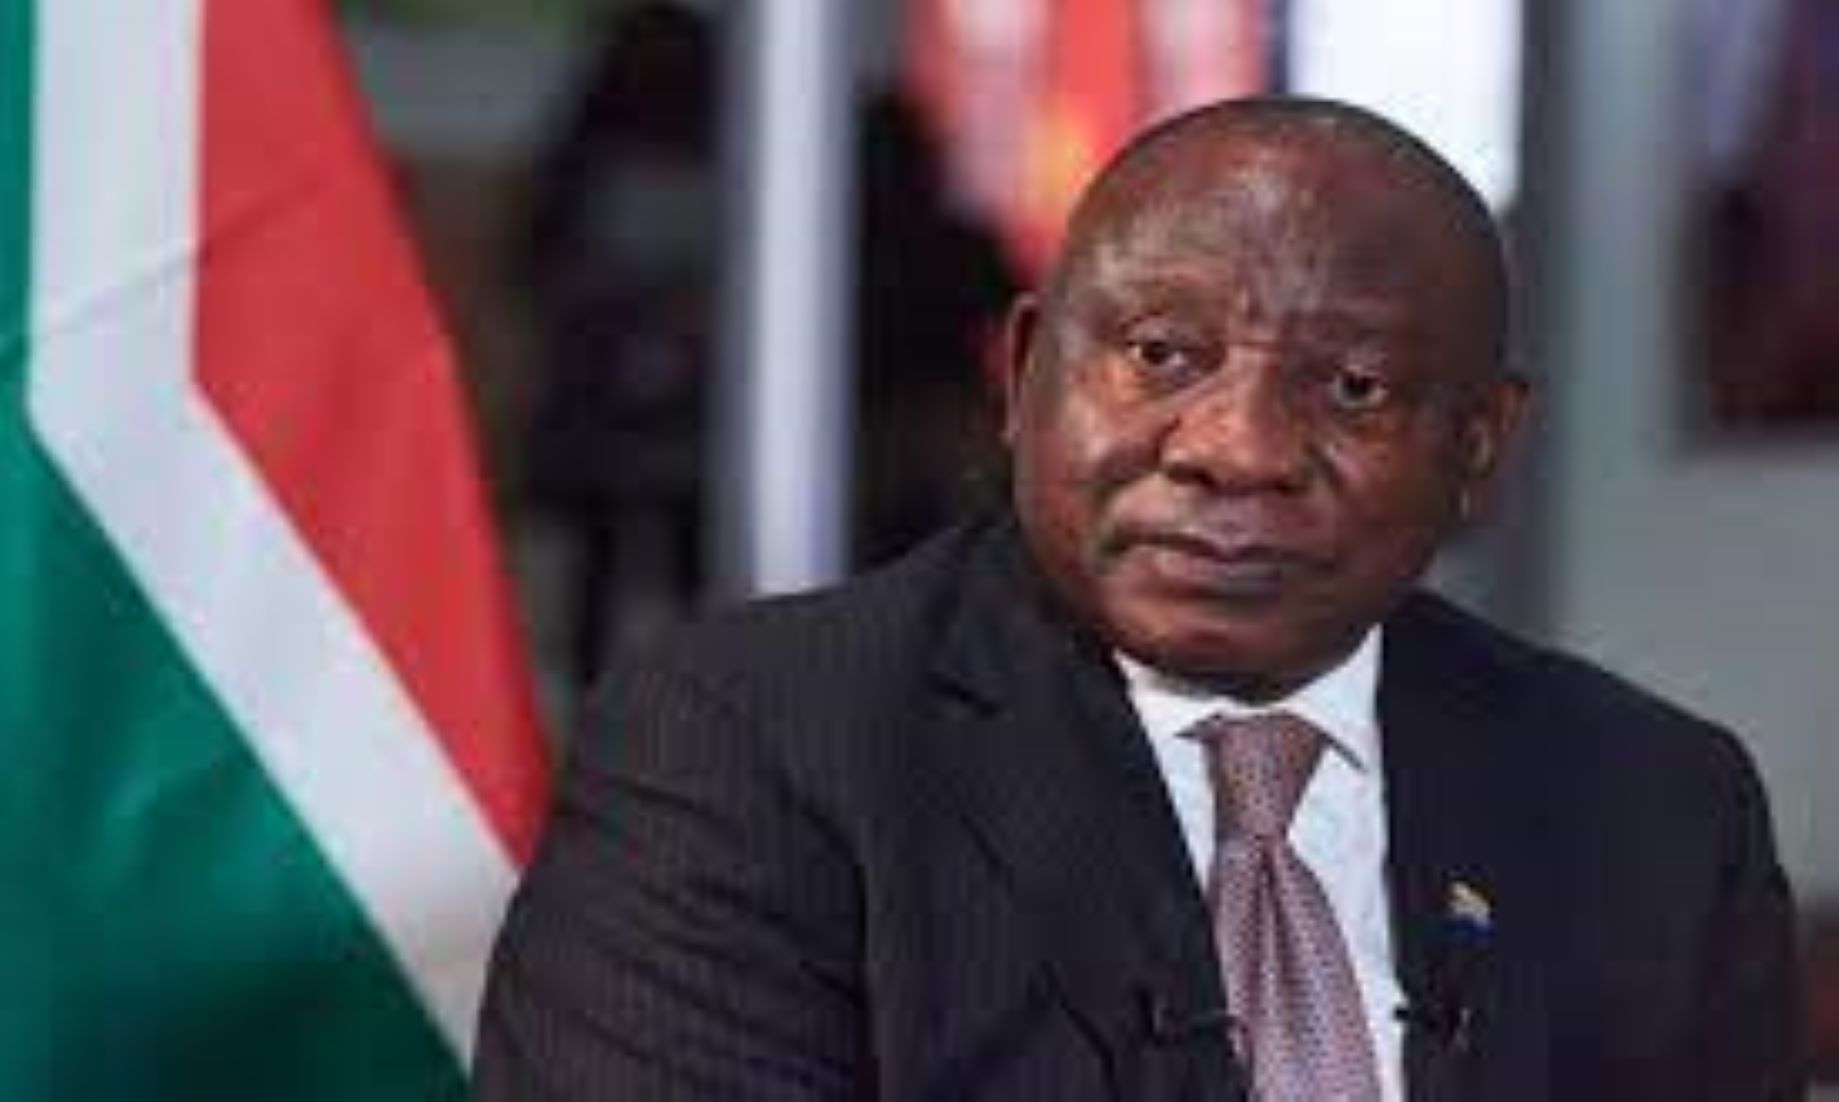 South African President Vowed To Address Energy Challenges, Fight Against Crime And Corruption